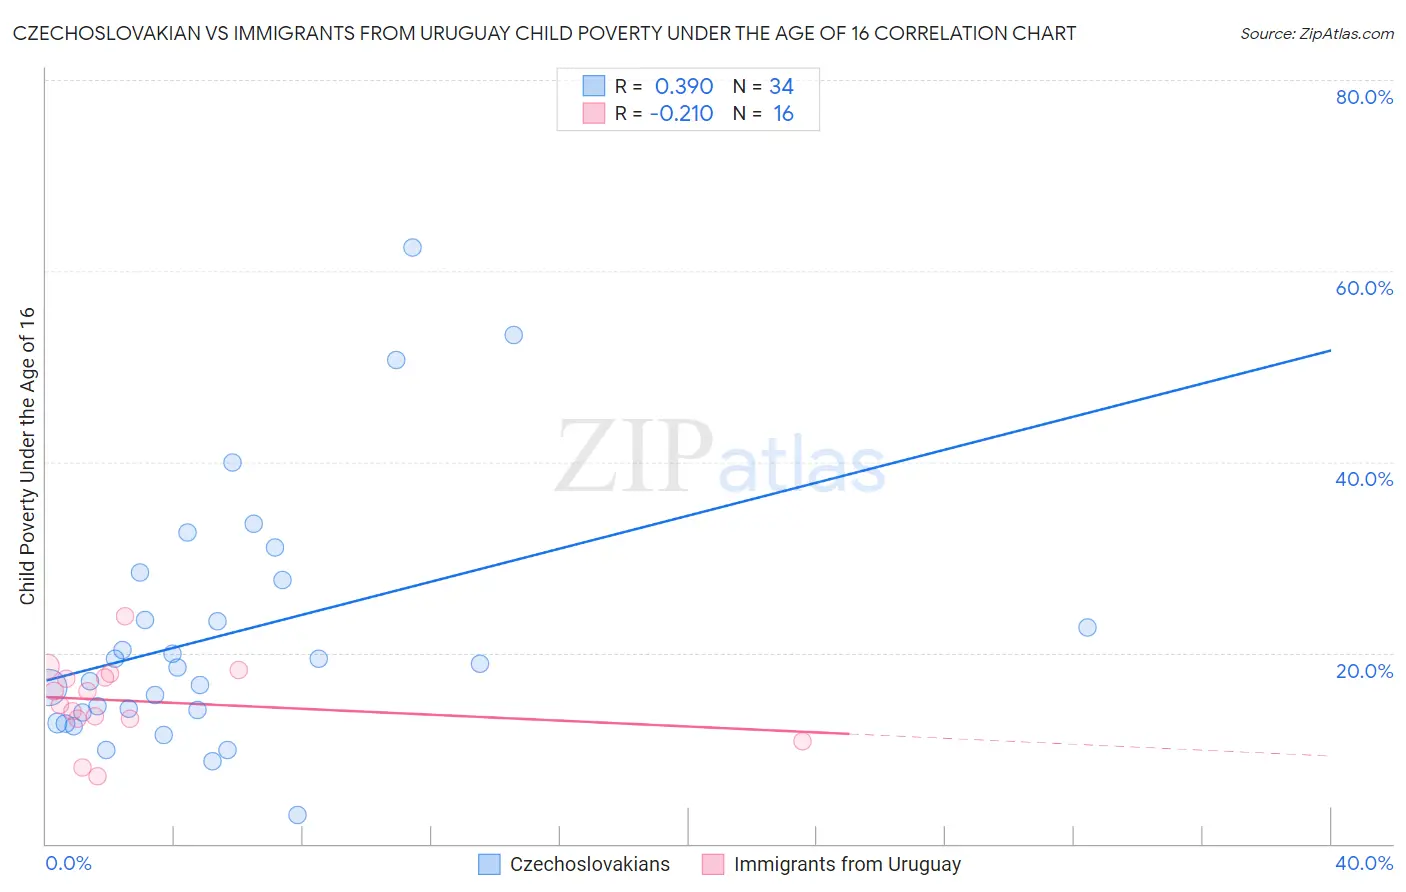 Czechoslovakian vs Immigrants from Uruguay Child Poverty Under the Age of 16